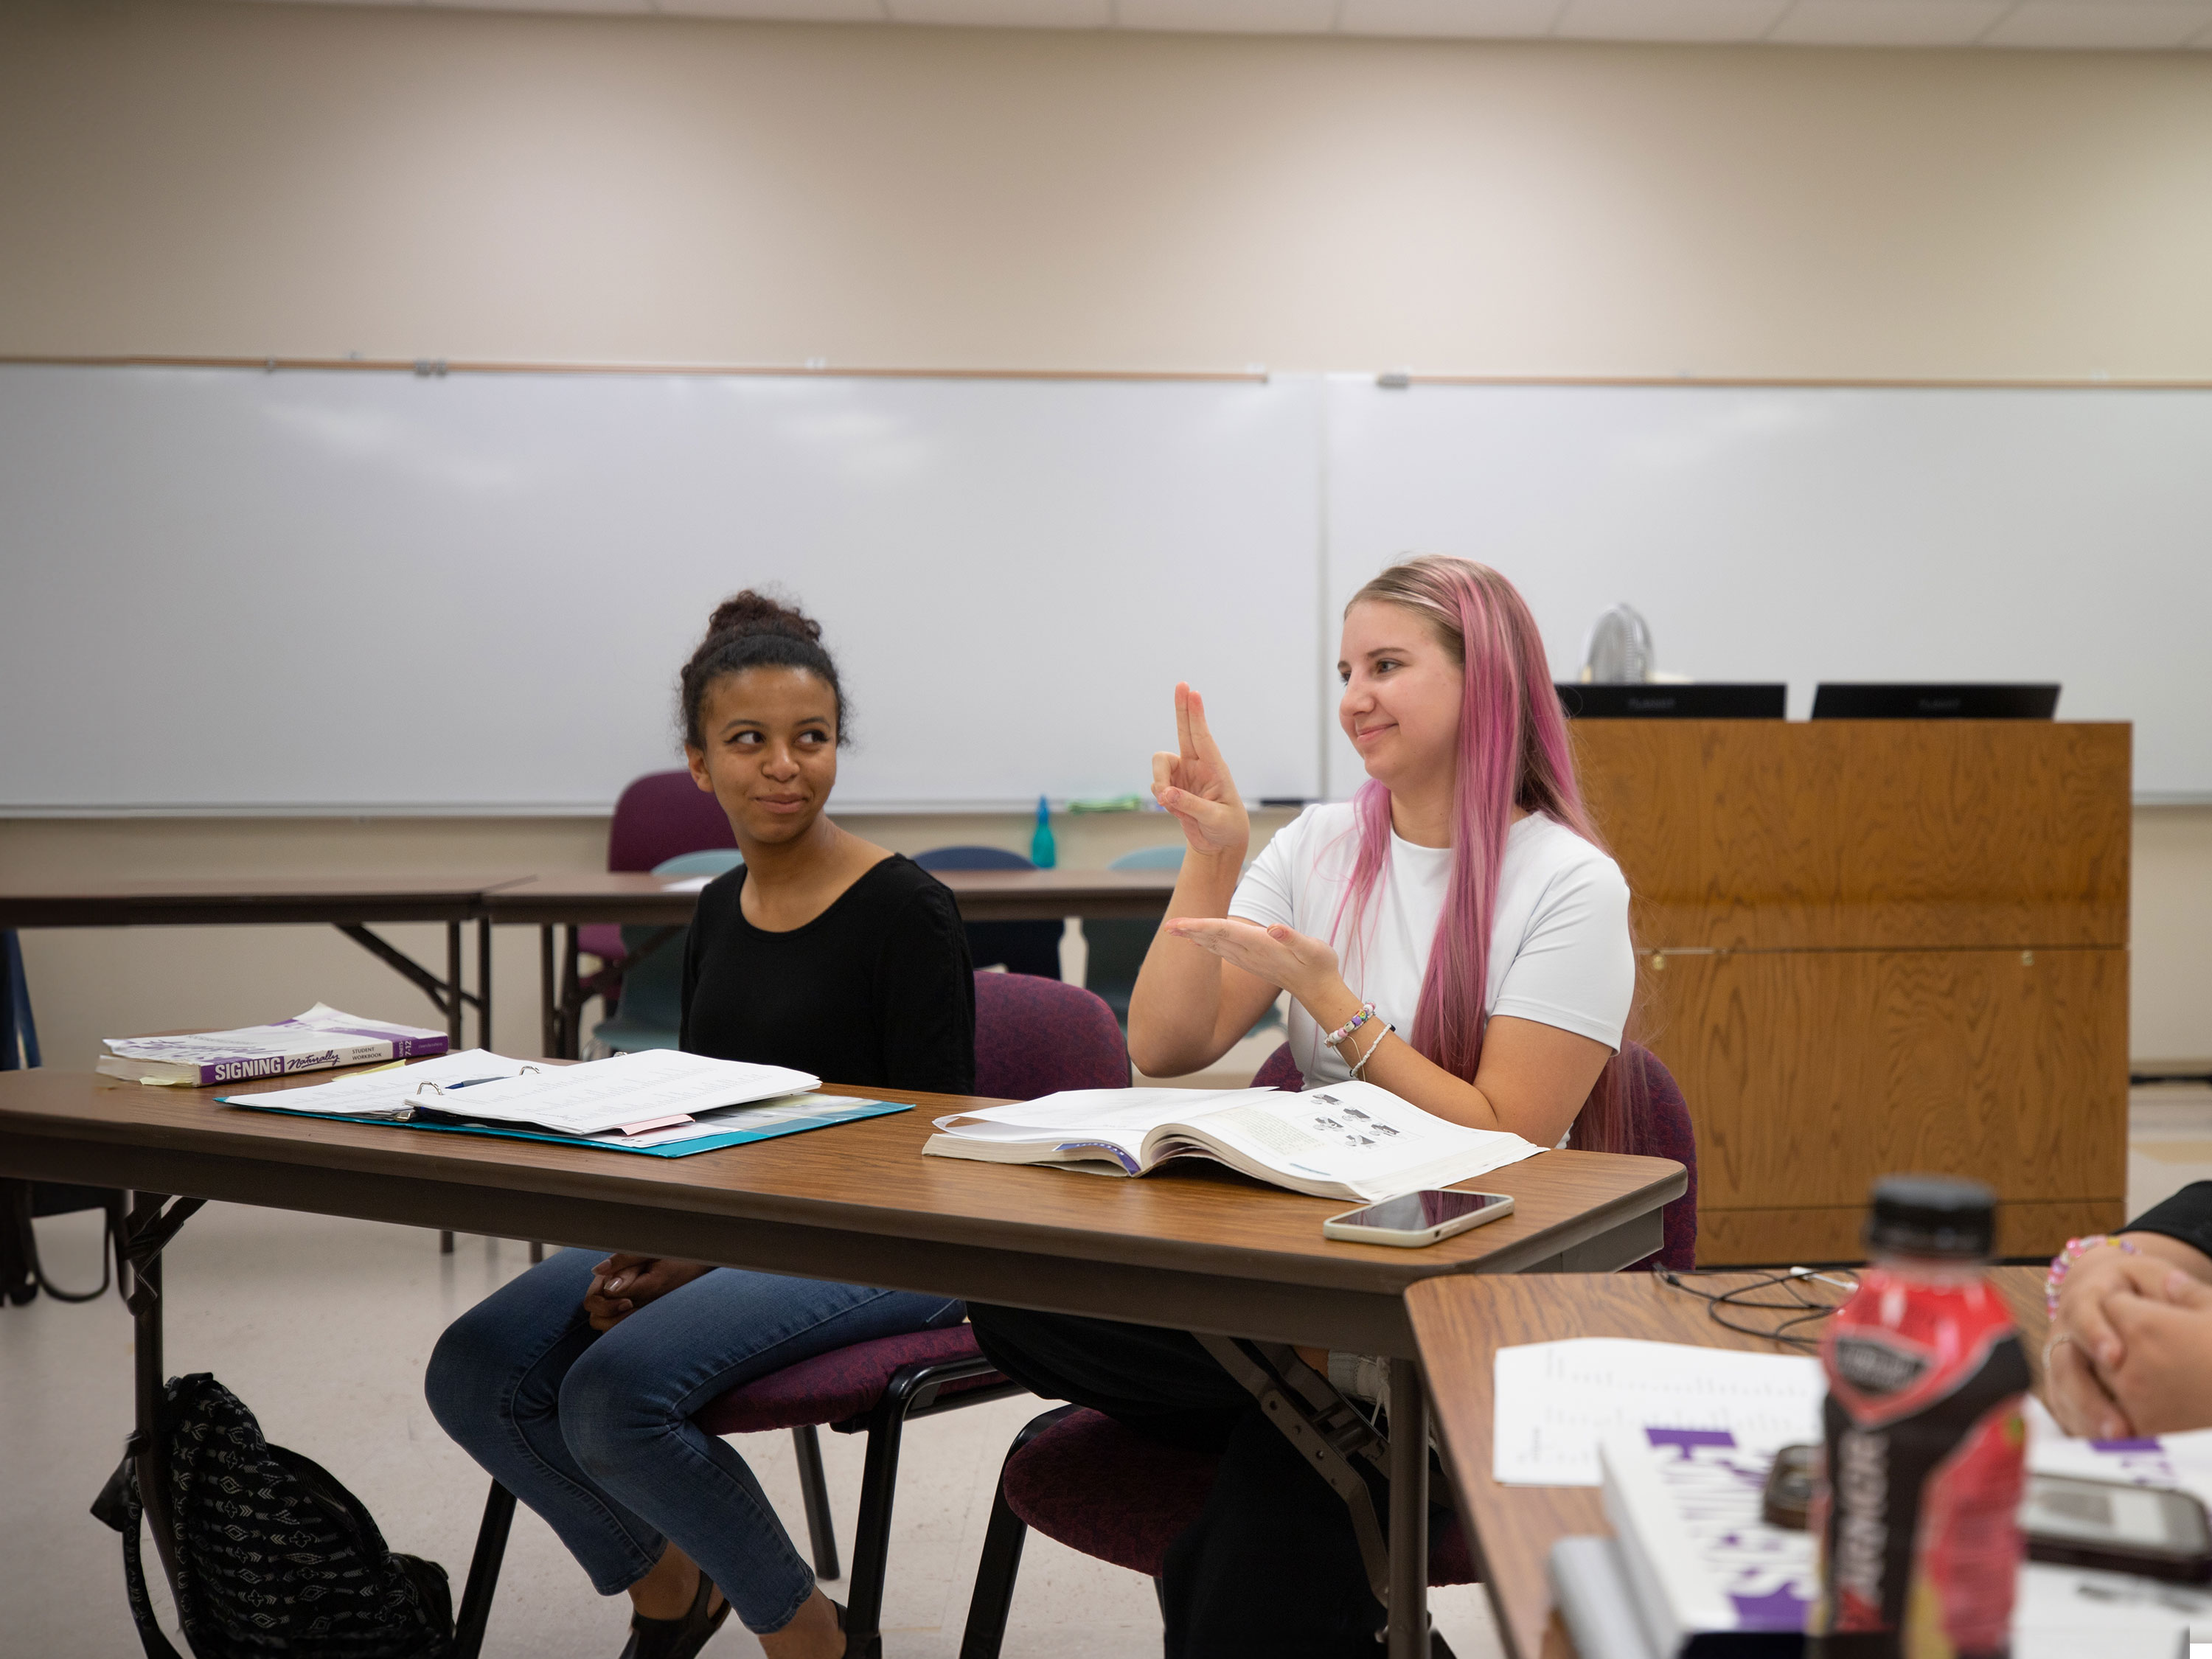 A student using American Sign Language while another student is looking at her in a classroom.